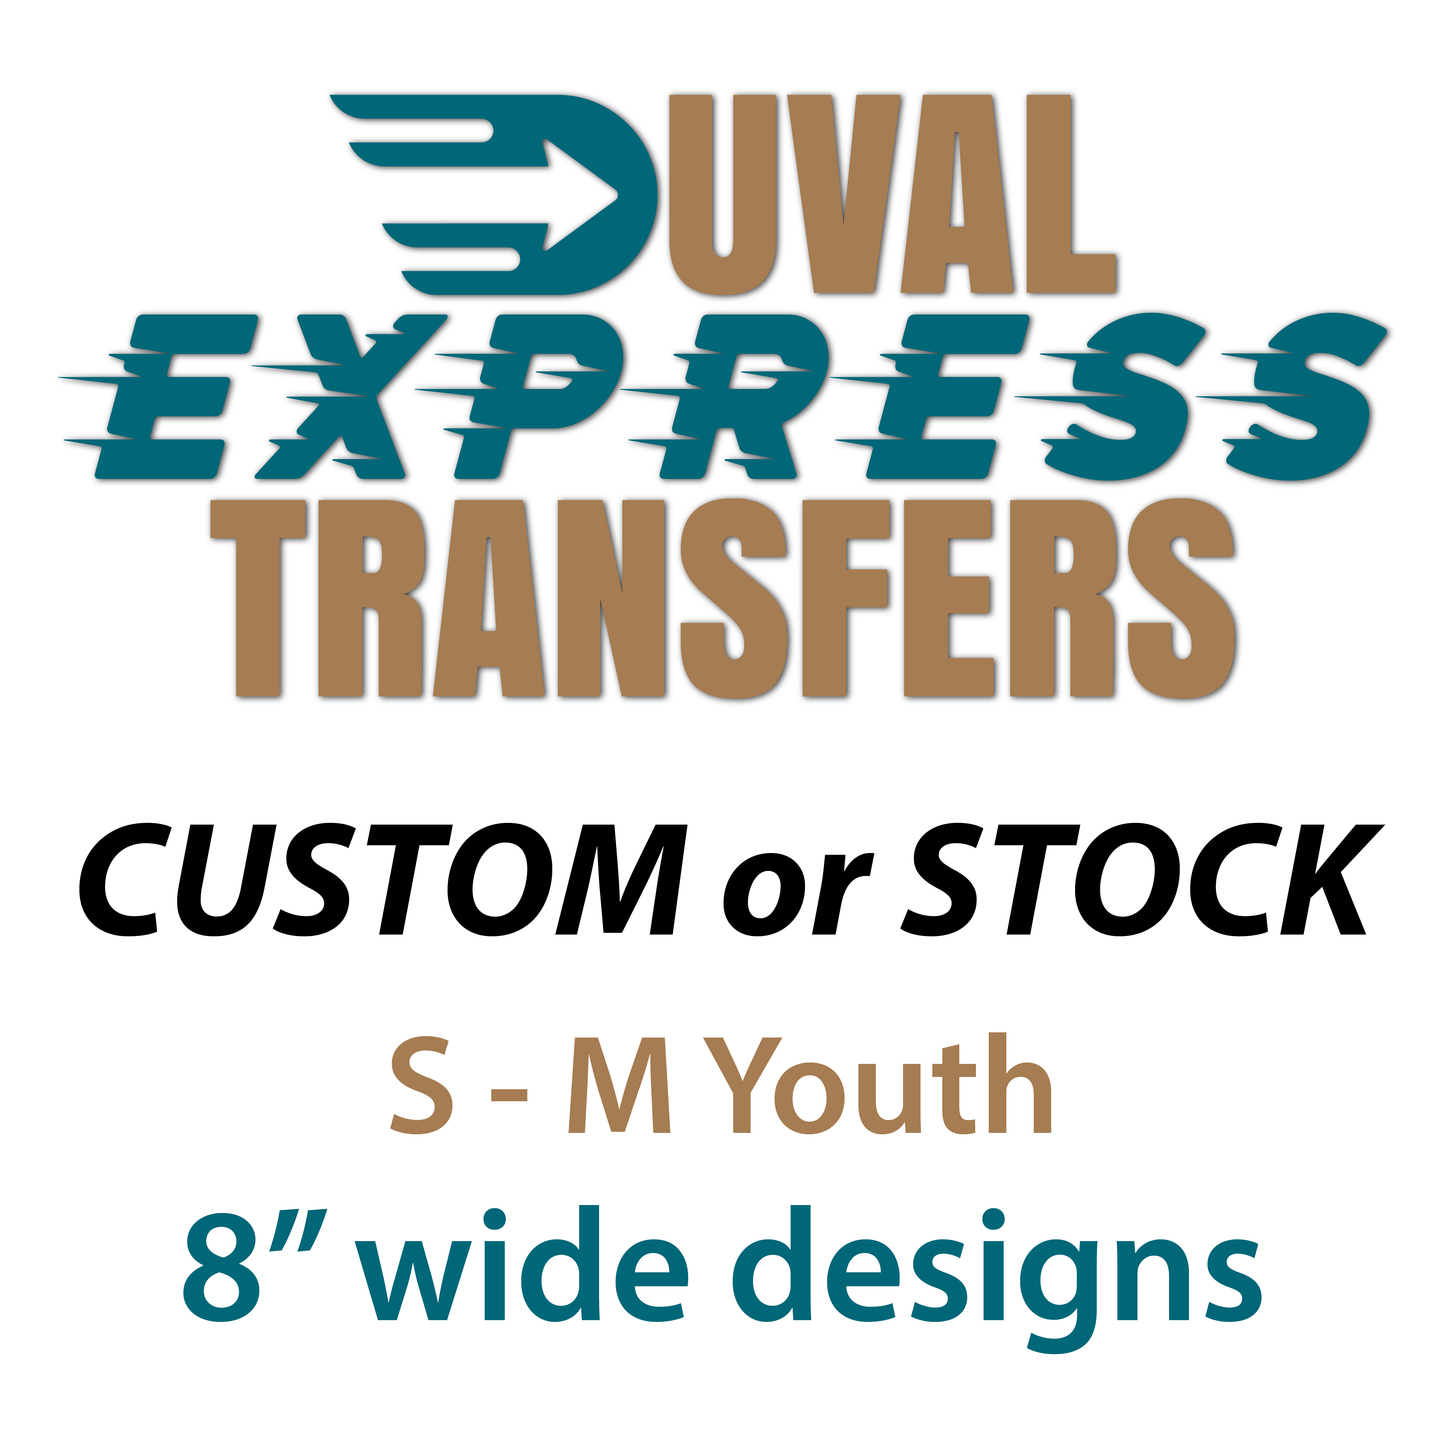 8" Wide Designs S - M Youth